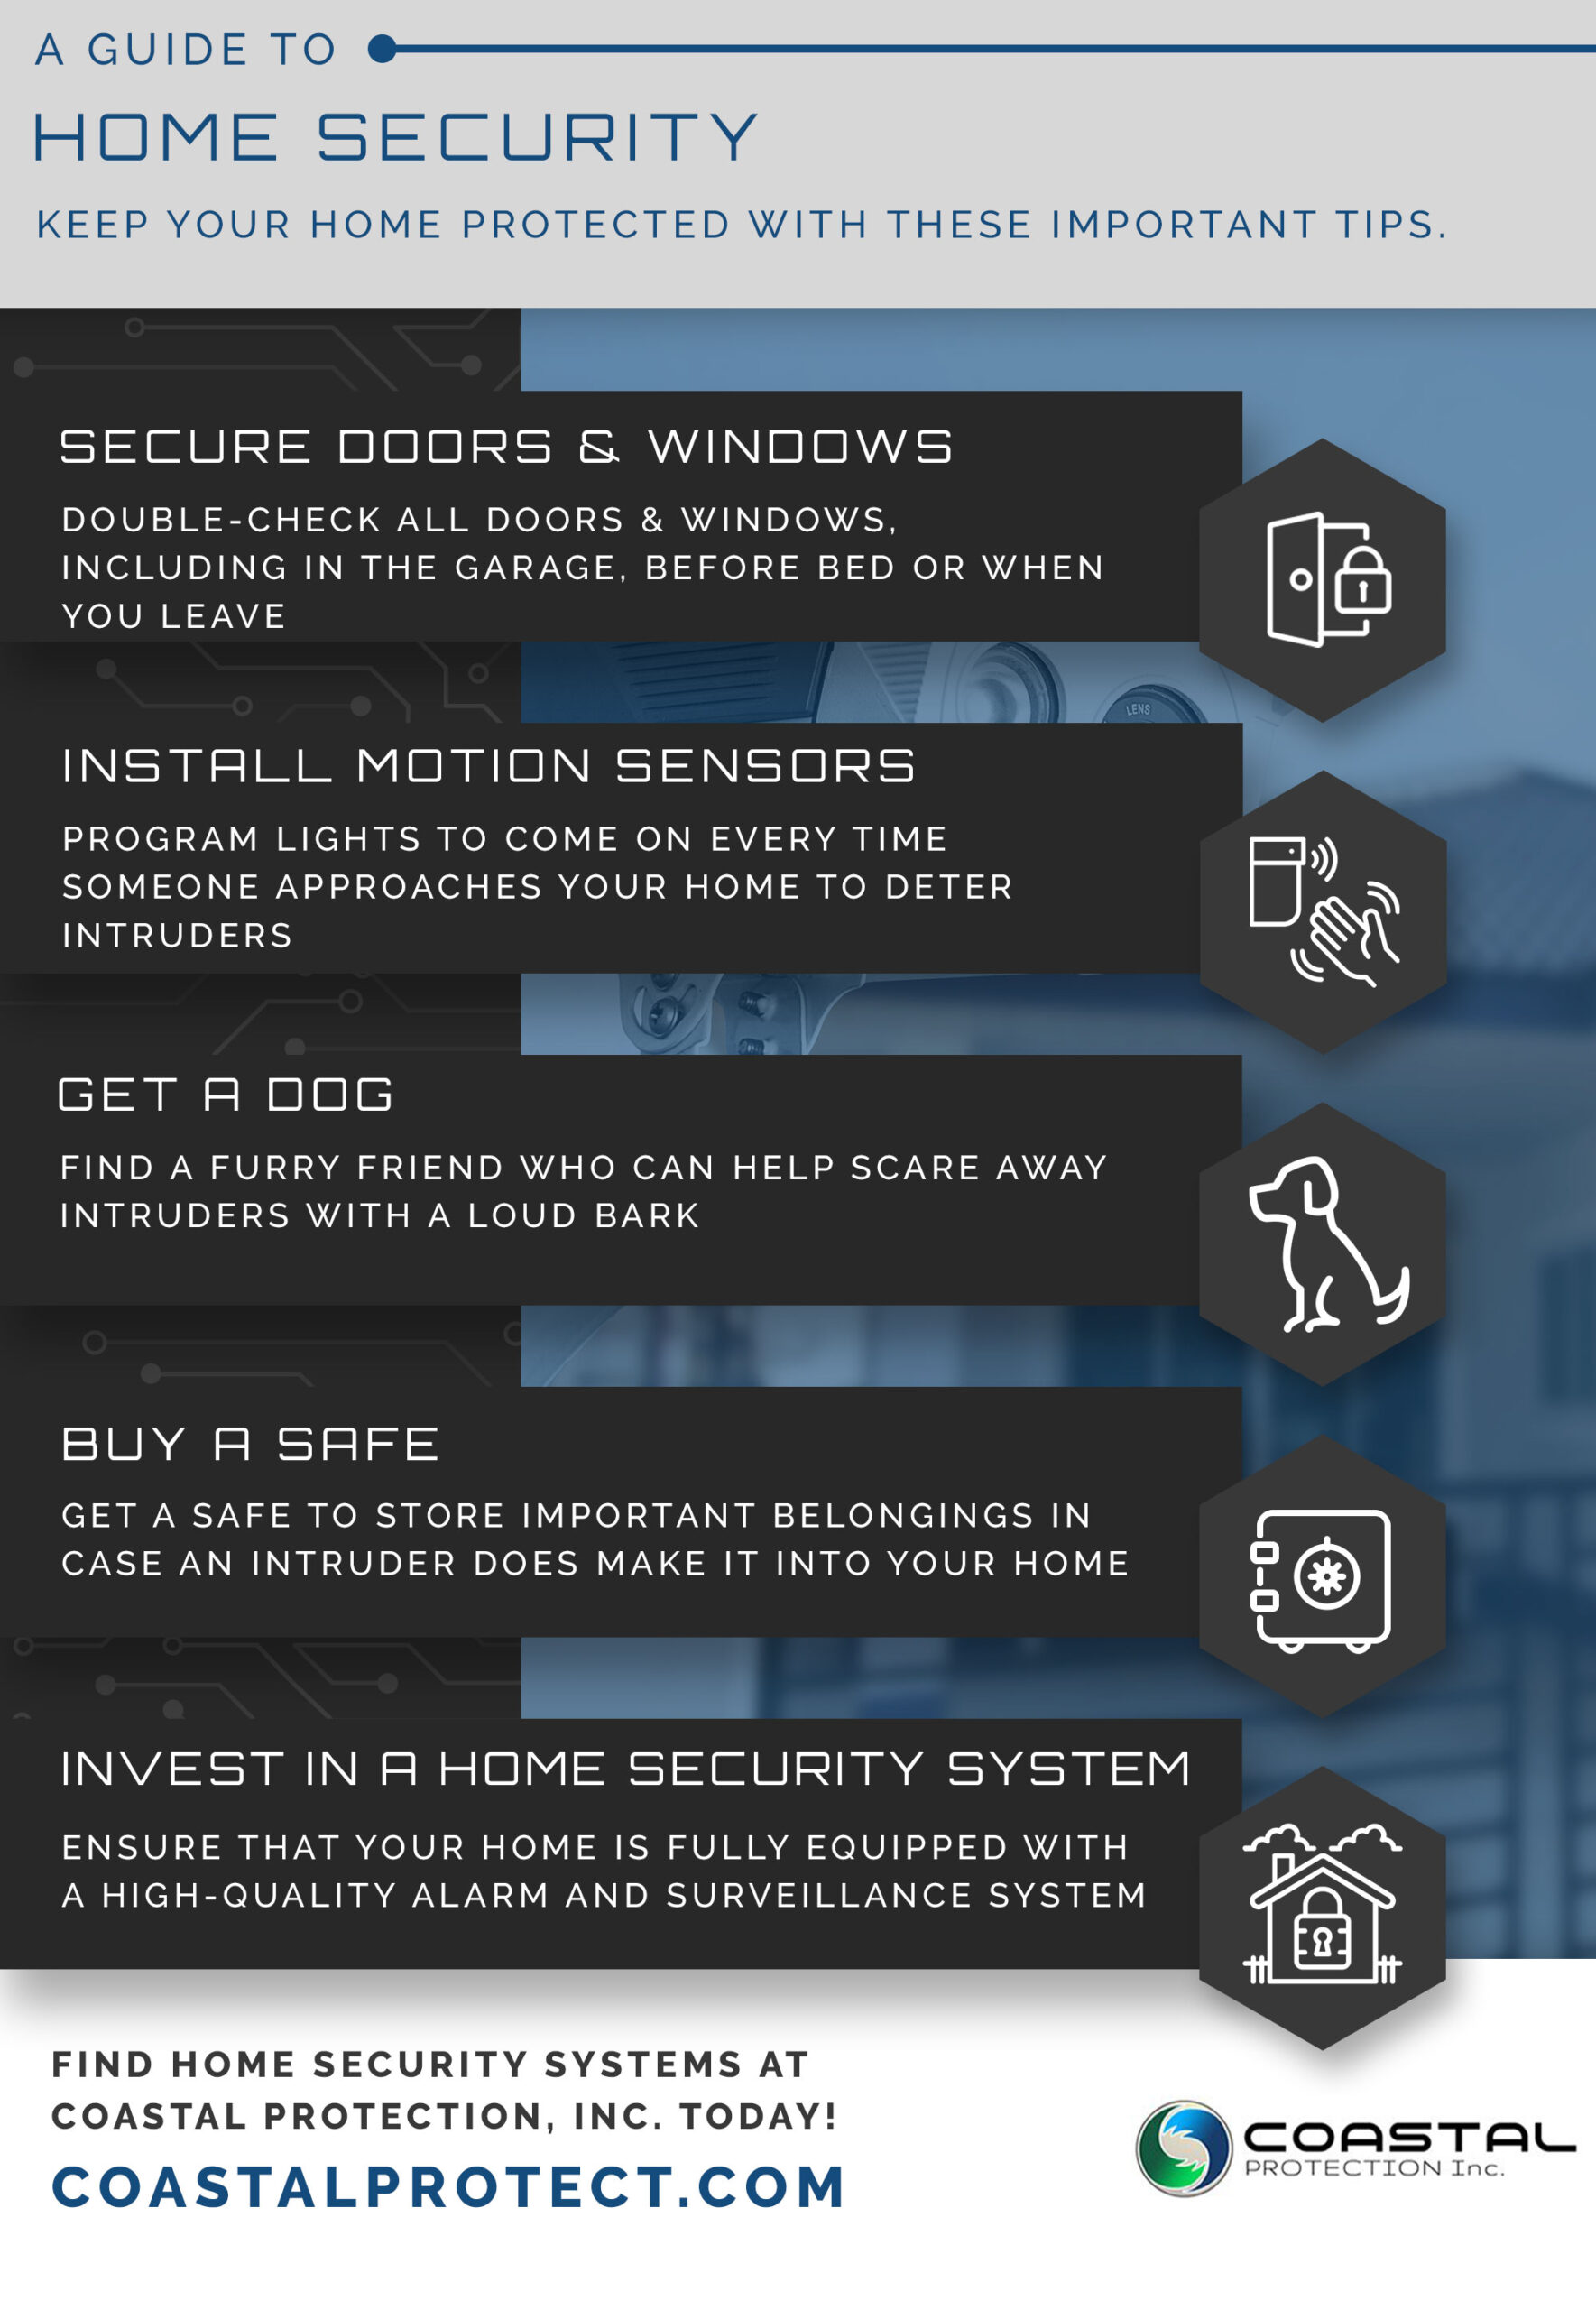 A Guide to Home Security